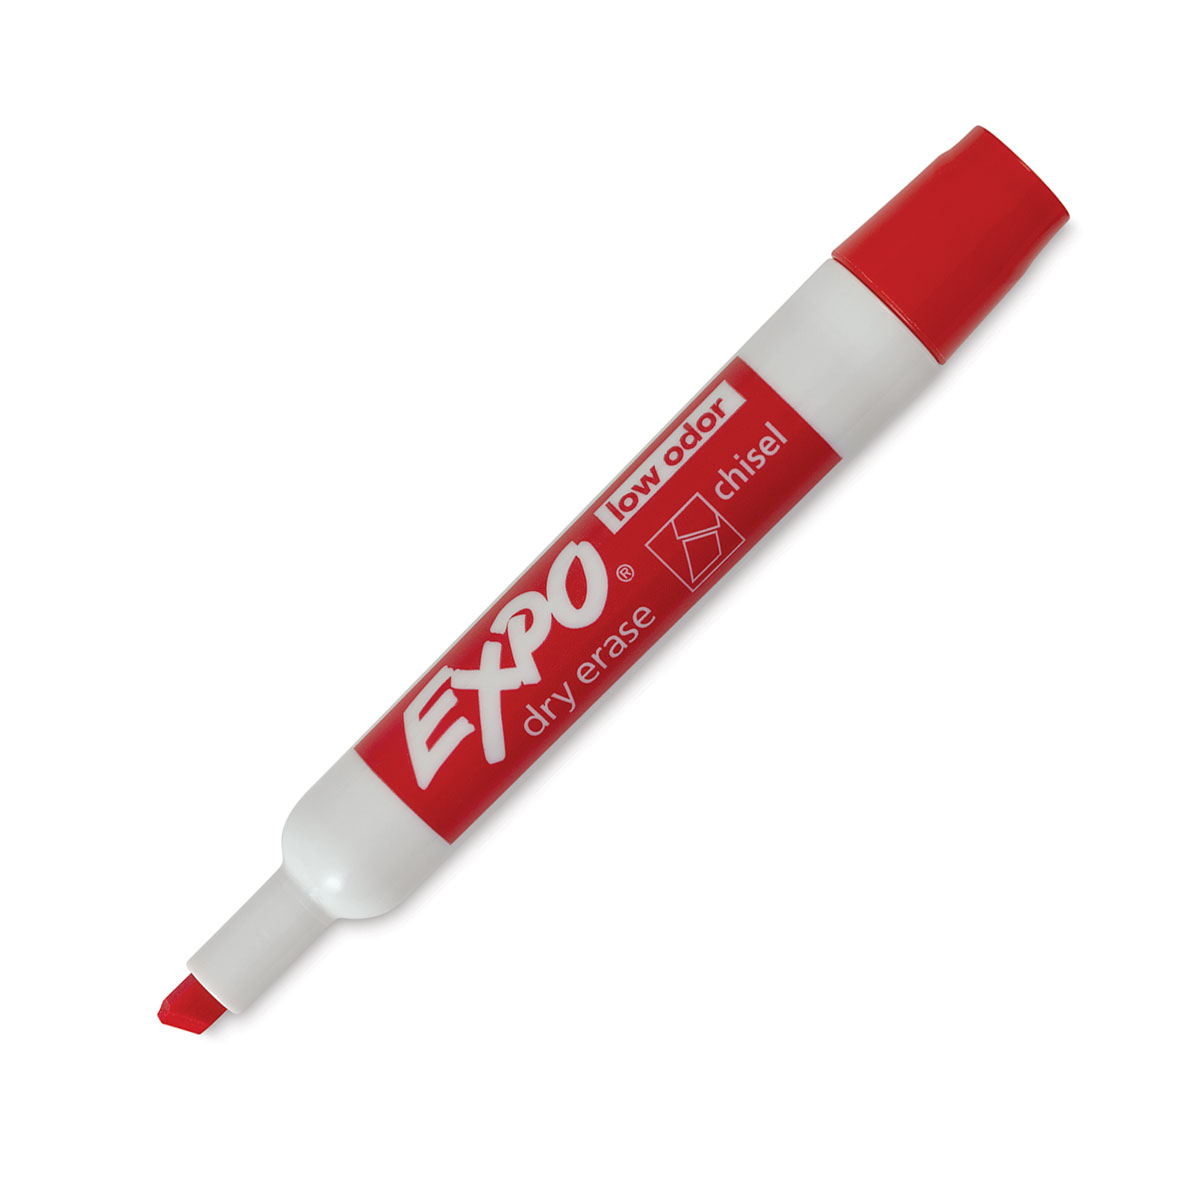 Which marker is RED? #expo #markers #fyp #foryou #intuitiontest #sharpie  #intuition #challenge 